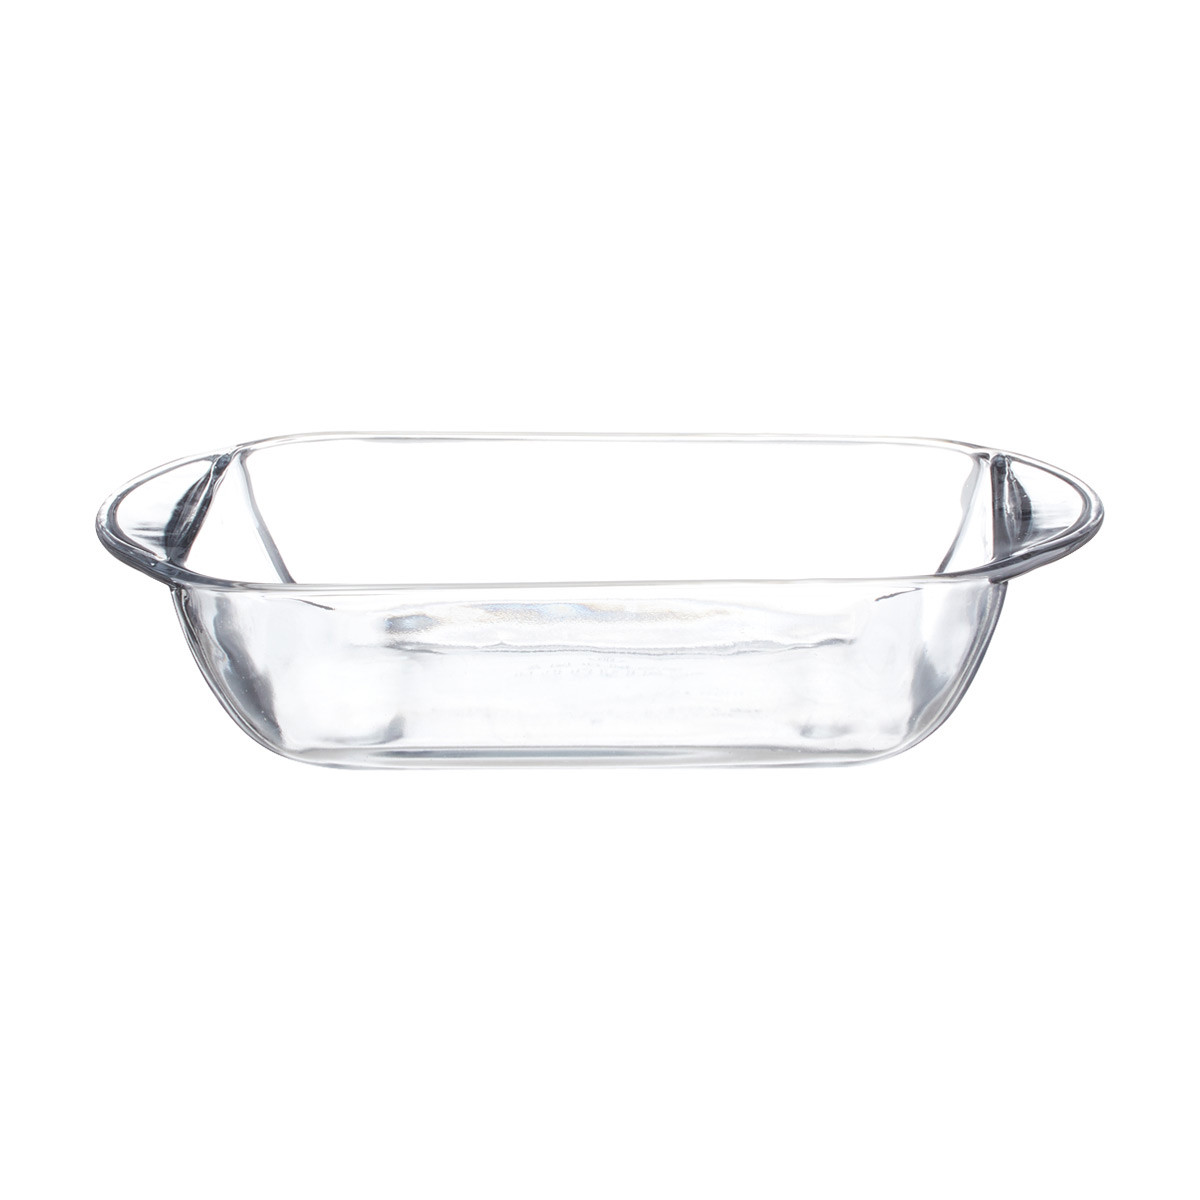 Baking Dish with Lid - Anchor Hocking